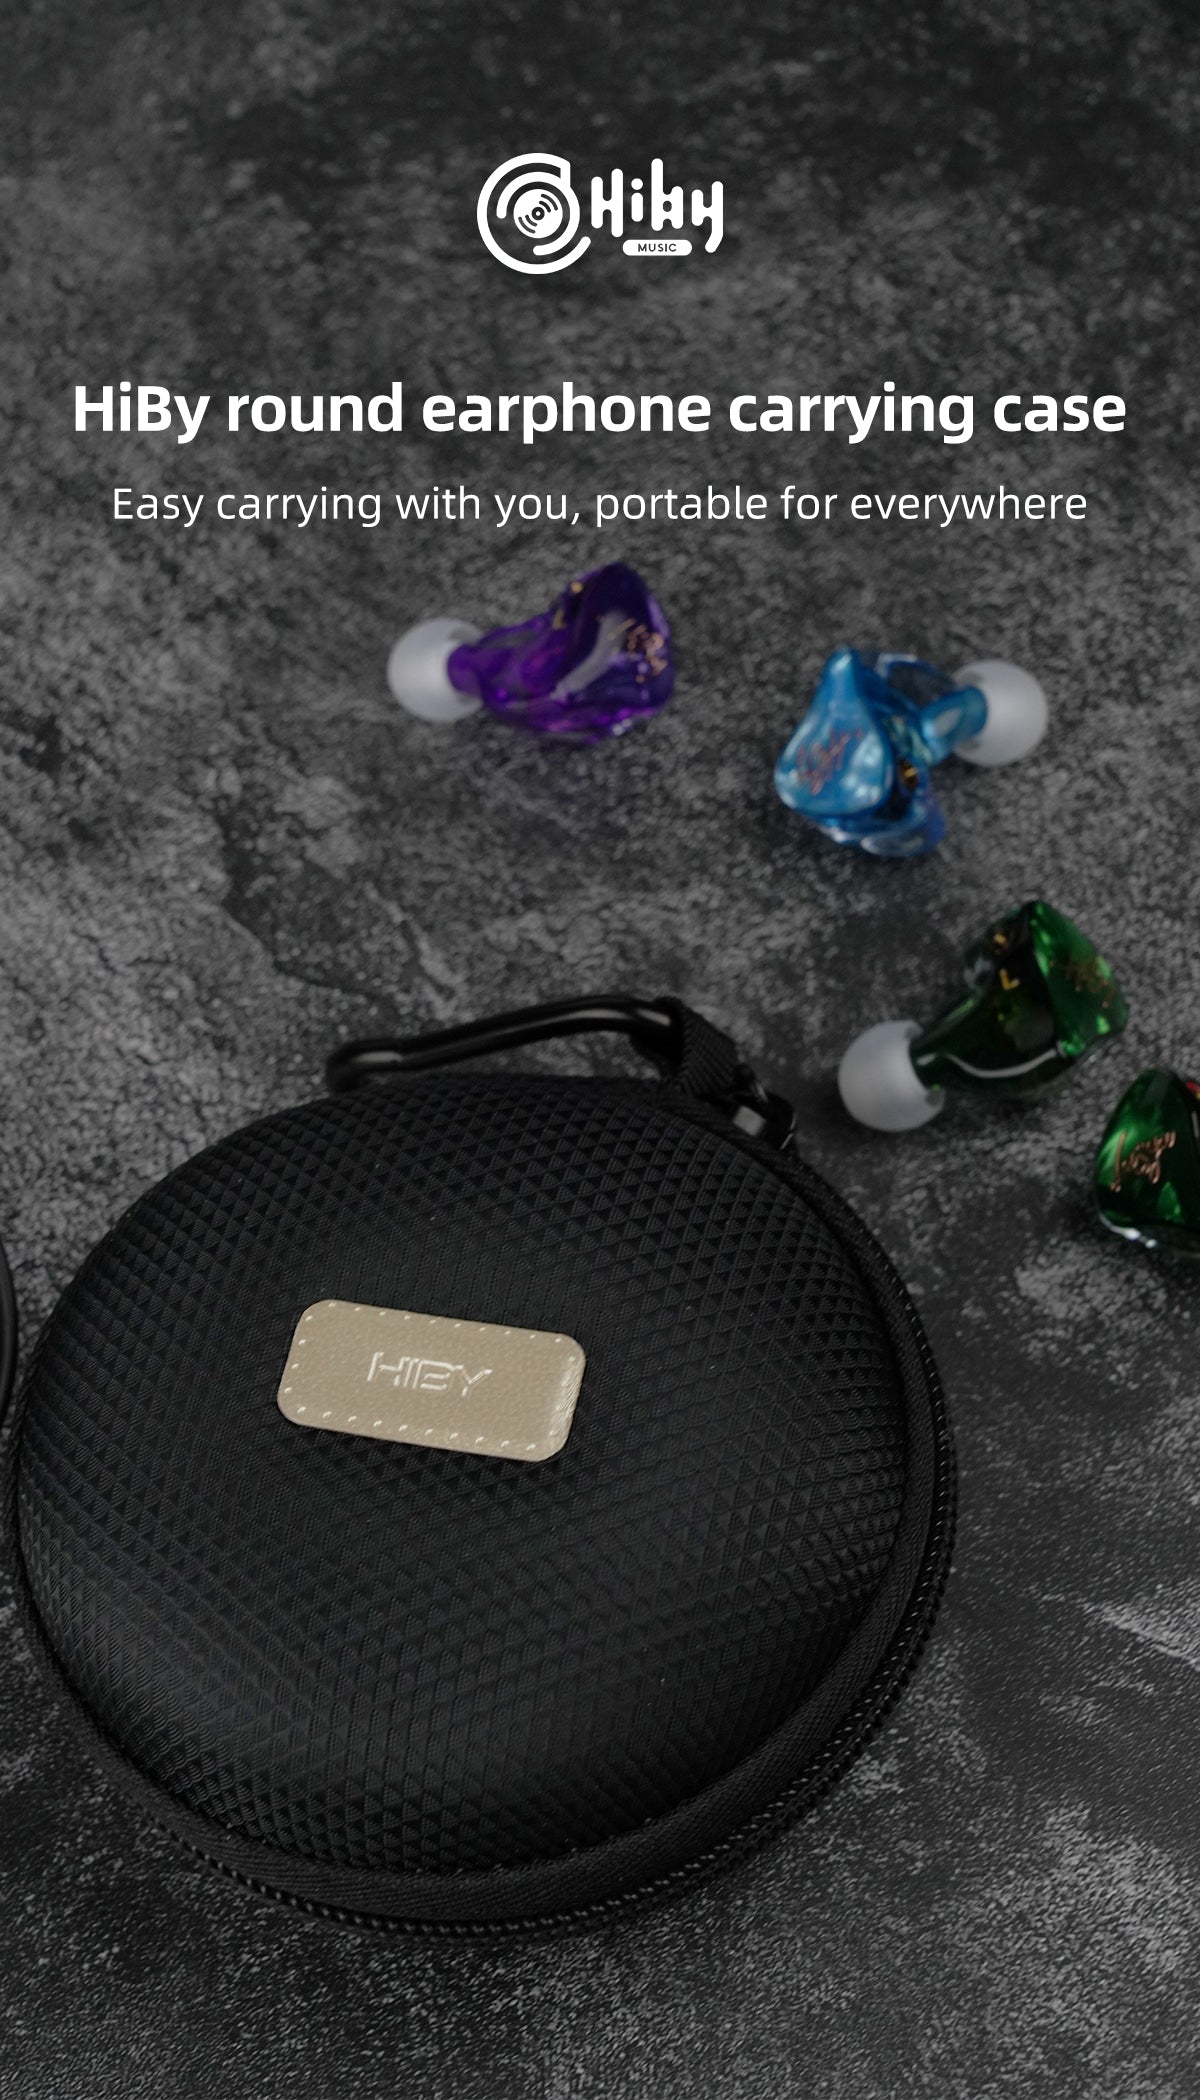 HiBy round earphone carrying case